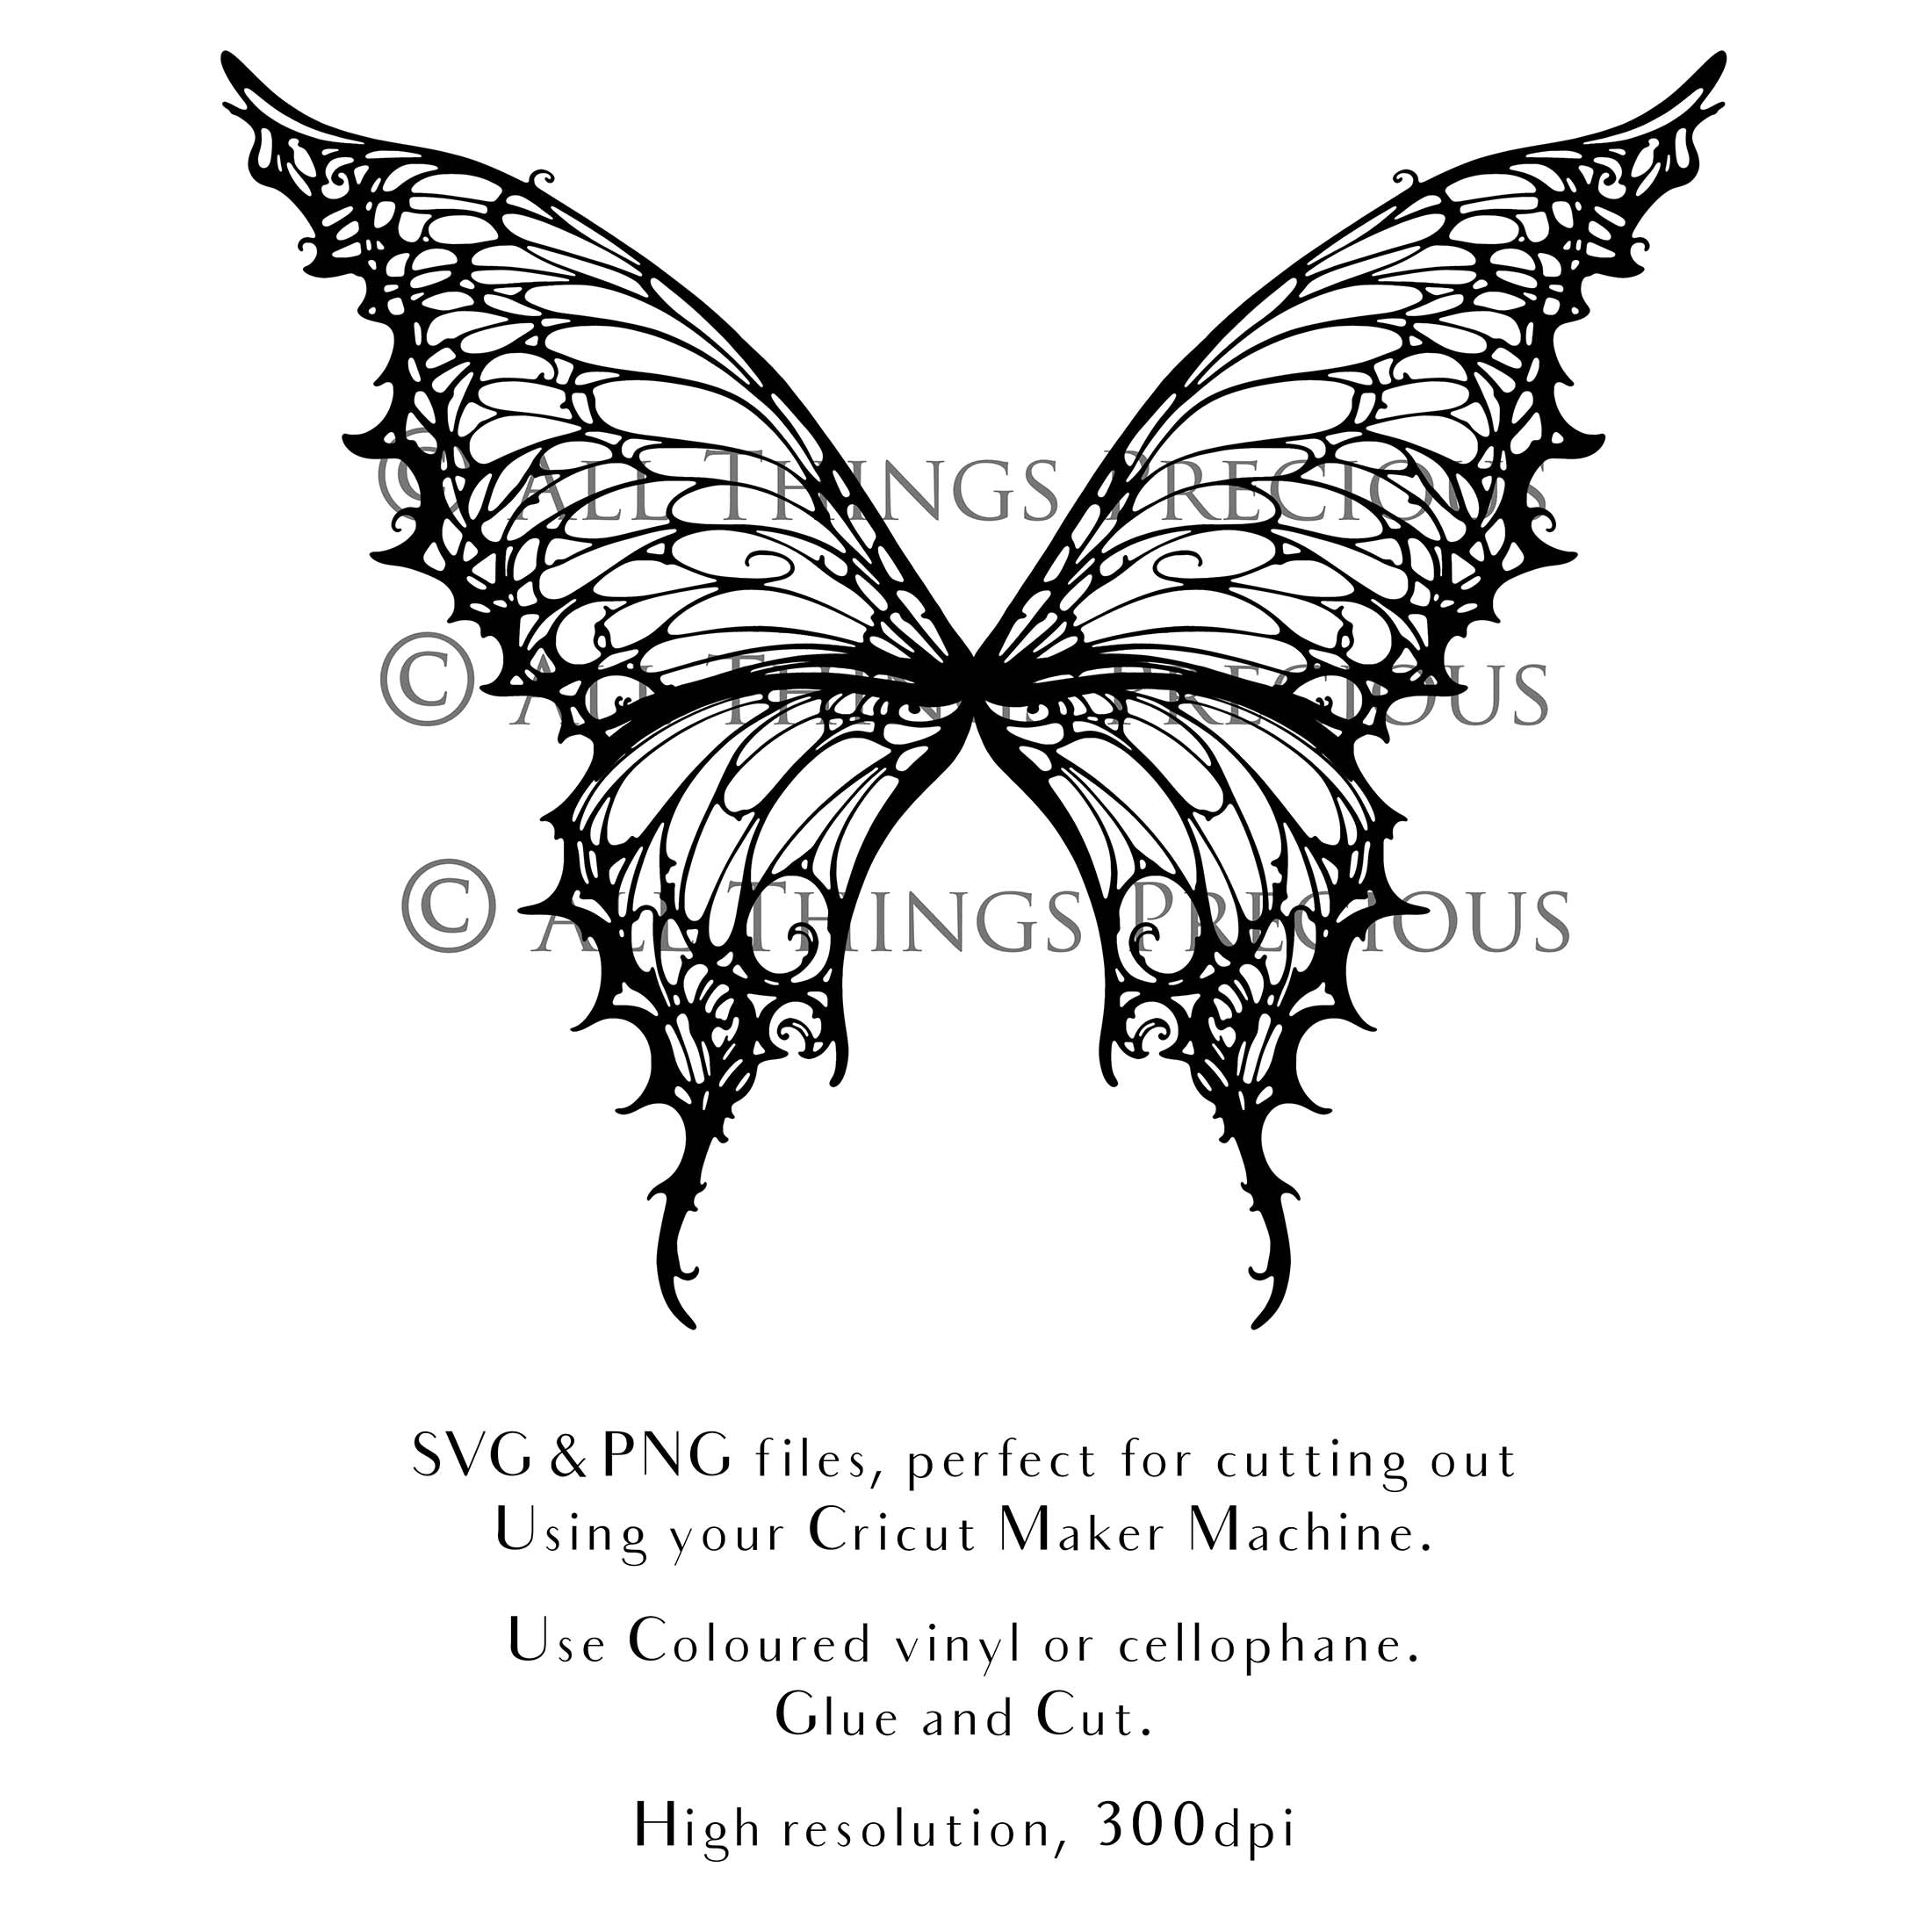 SVG, PNG Clipart, Fairy Wings, for Cricut and Silhouette Machine. Cut out and make your own real fairy wings. For Costumes, Halloween, Cosplay Wings, Adult Wings, Child size wings. Use them for Wedding invitations, sublimation print or decorations.